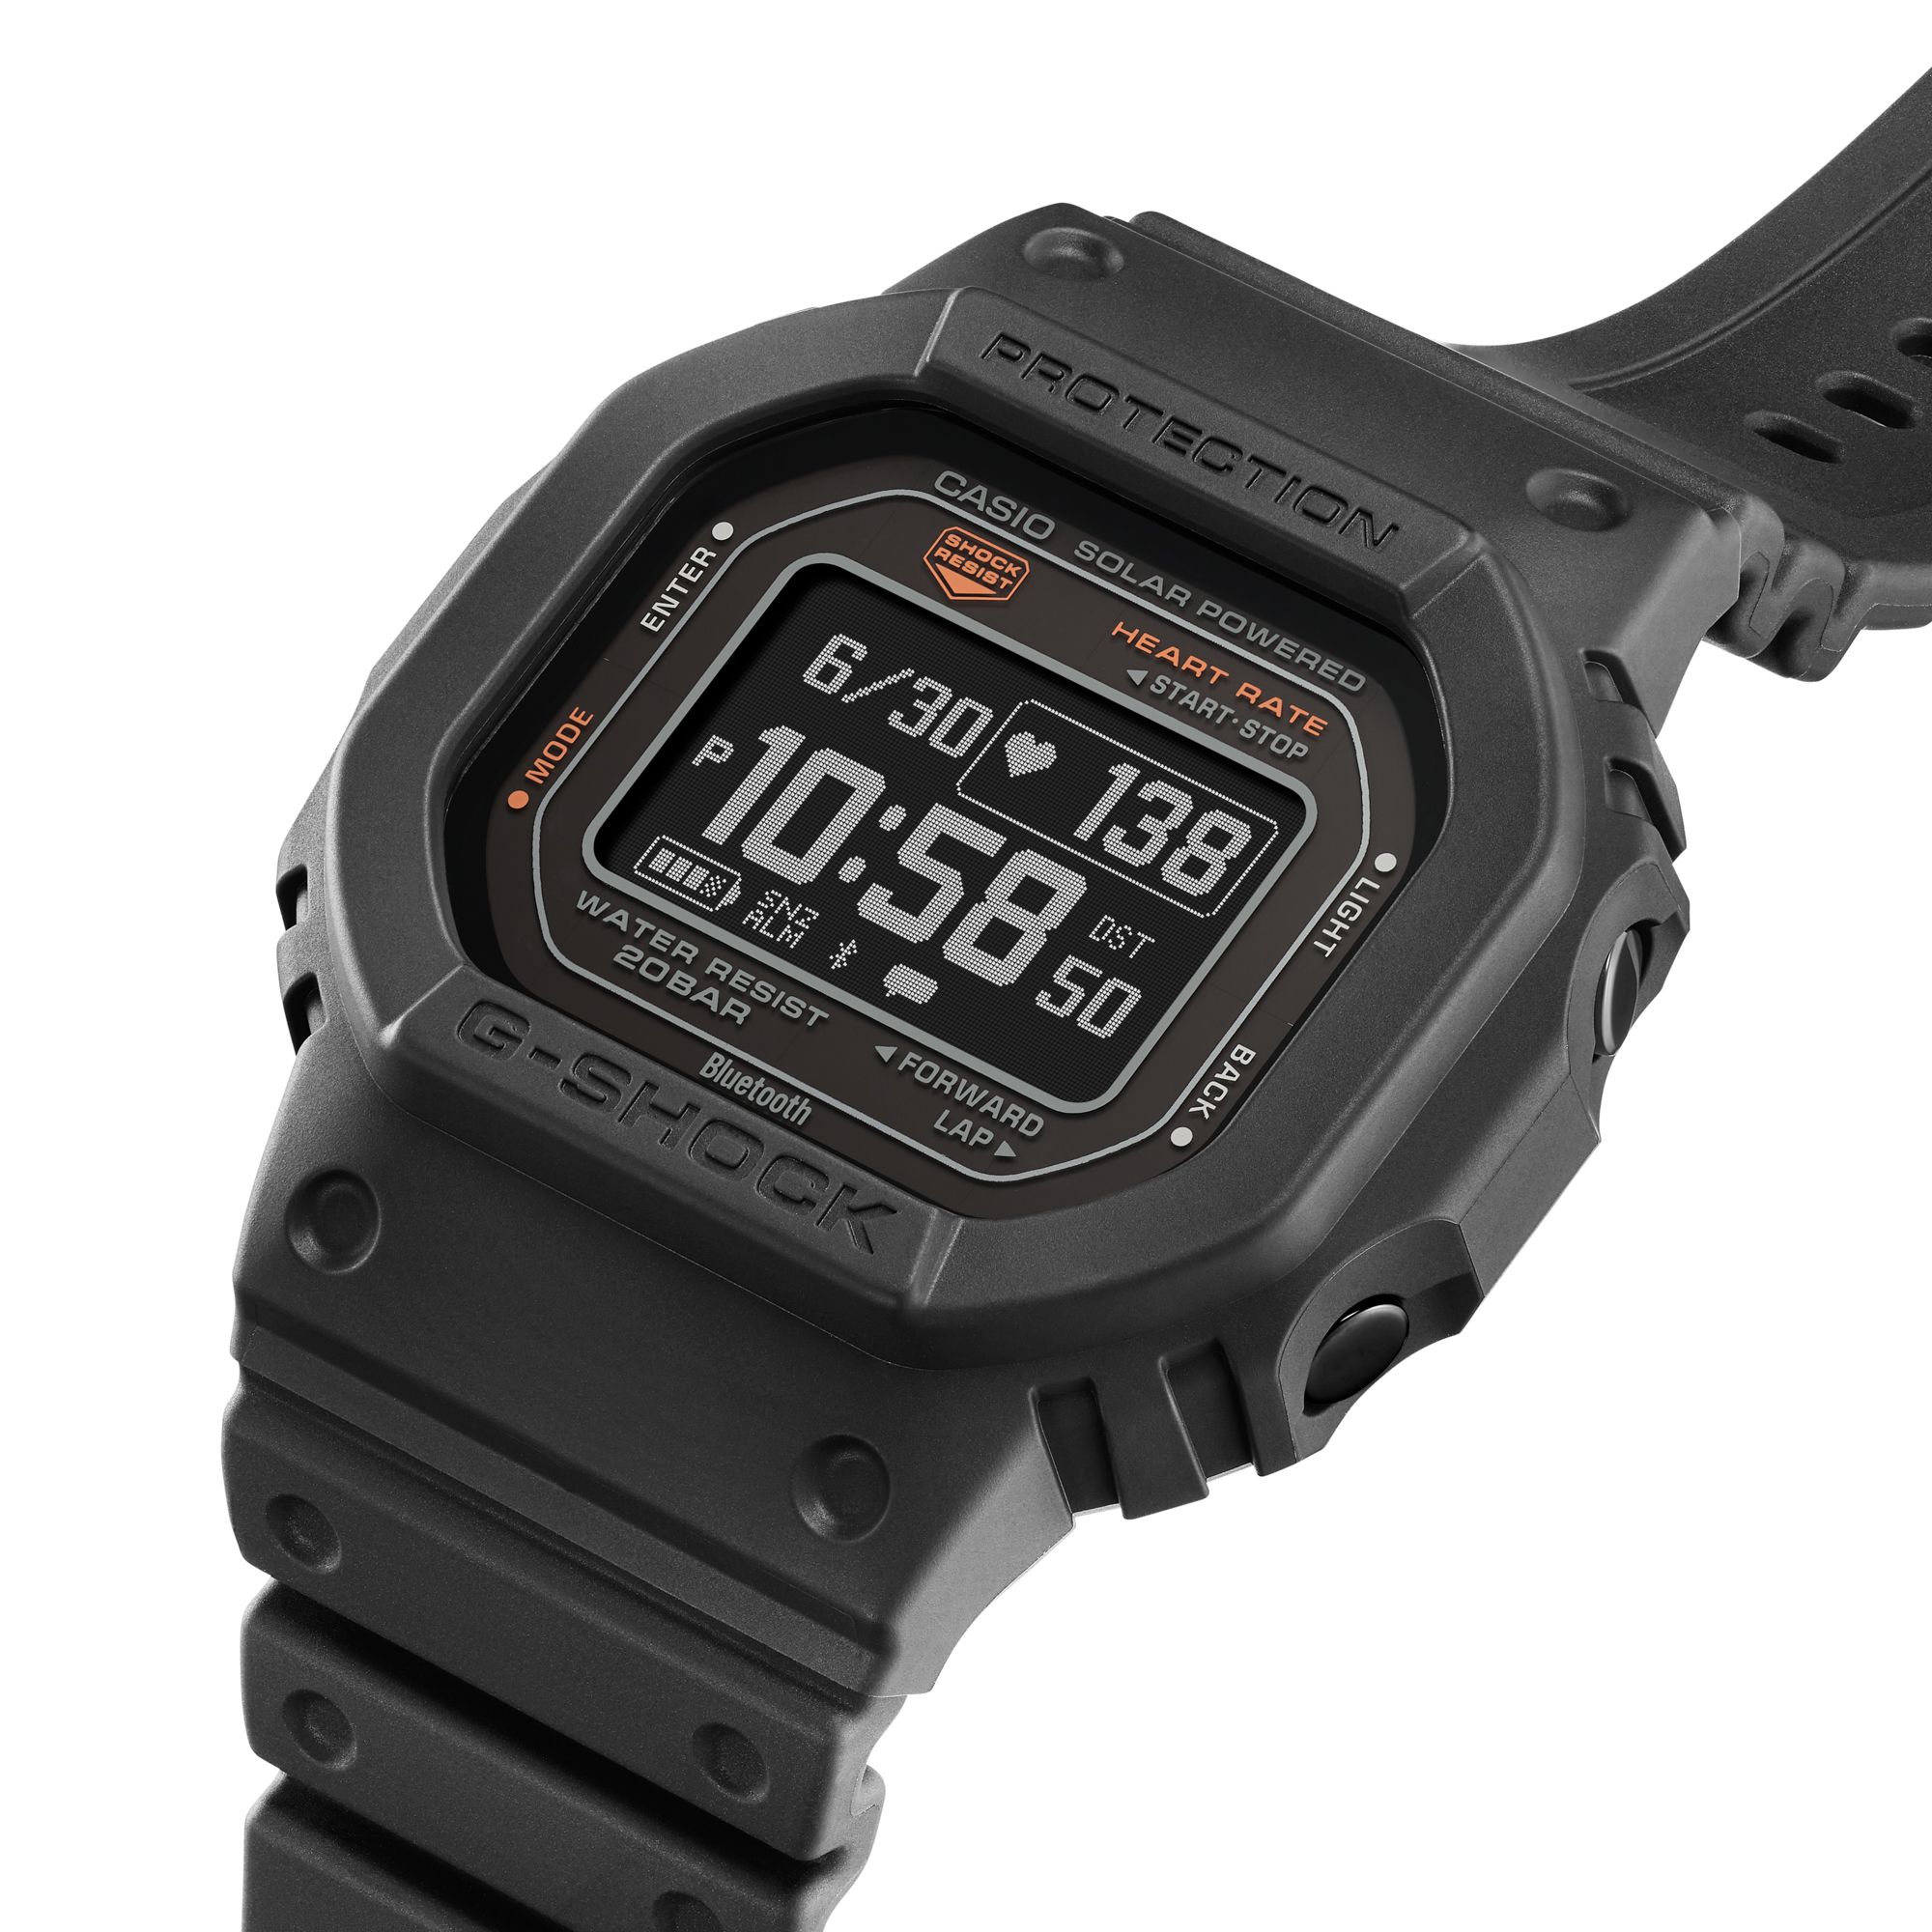 Casio G-Shock Move DW-H5600 Series Multisport/Heart Rate Watch